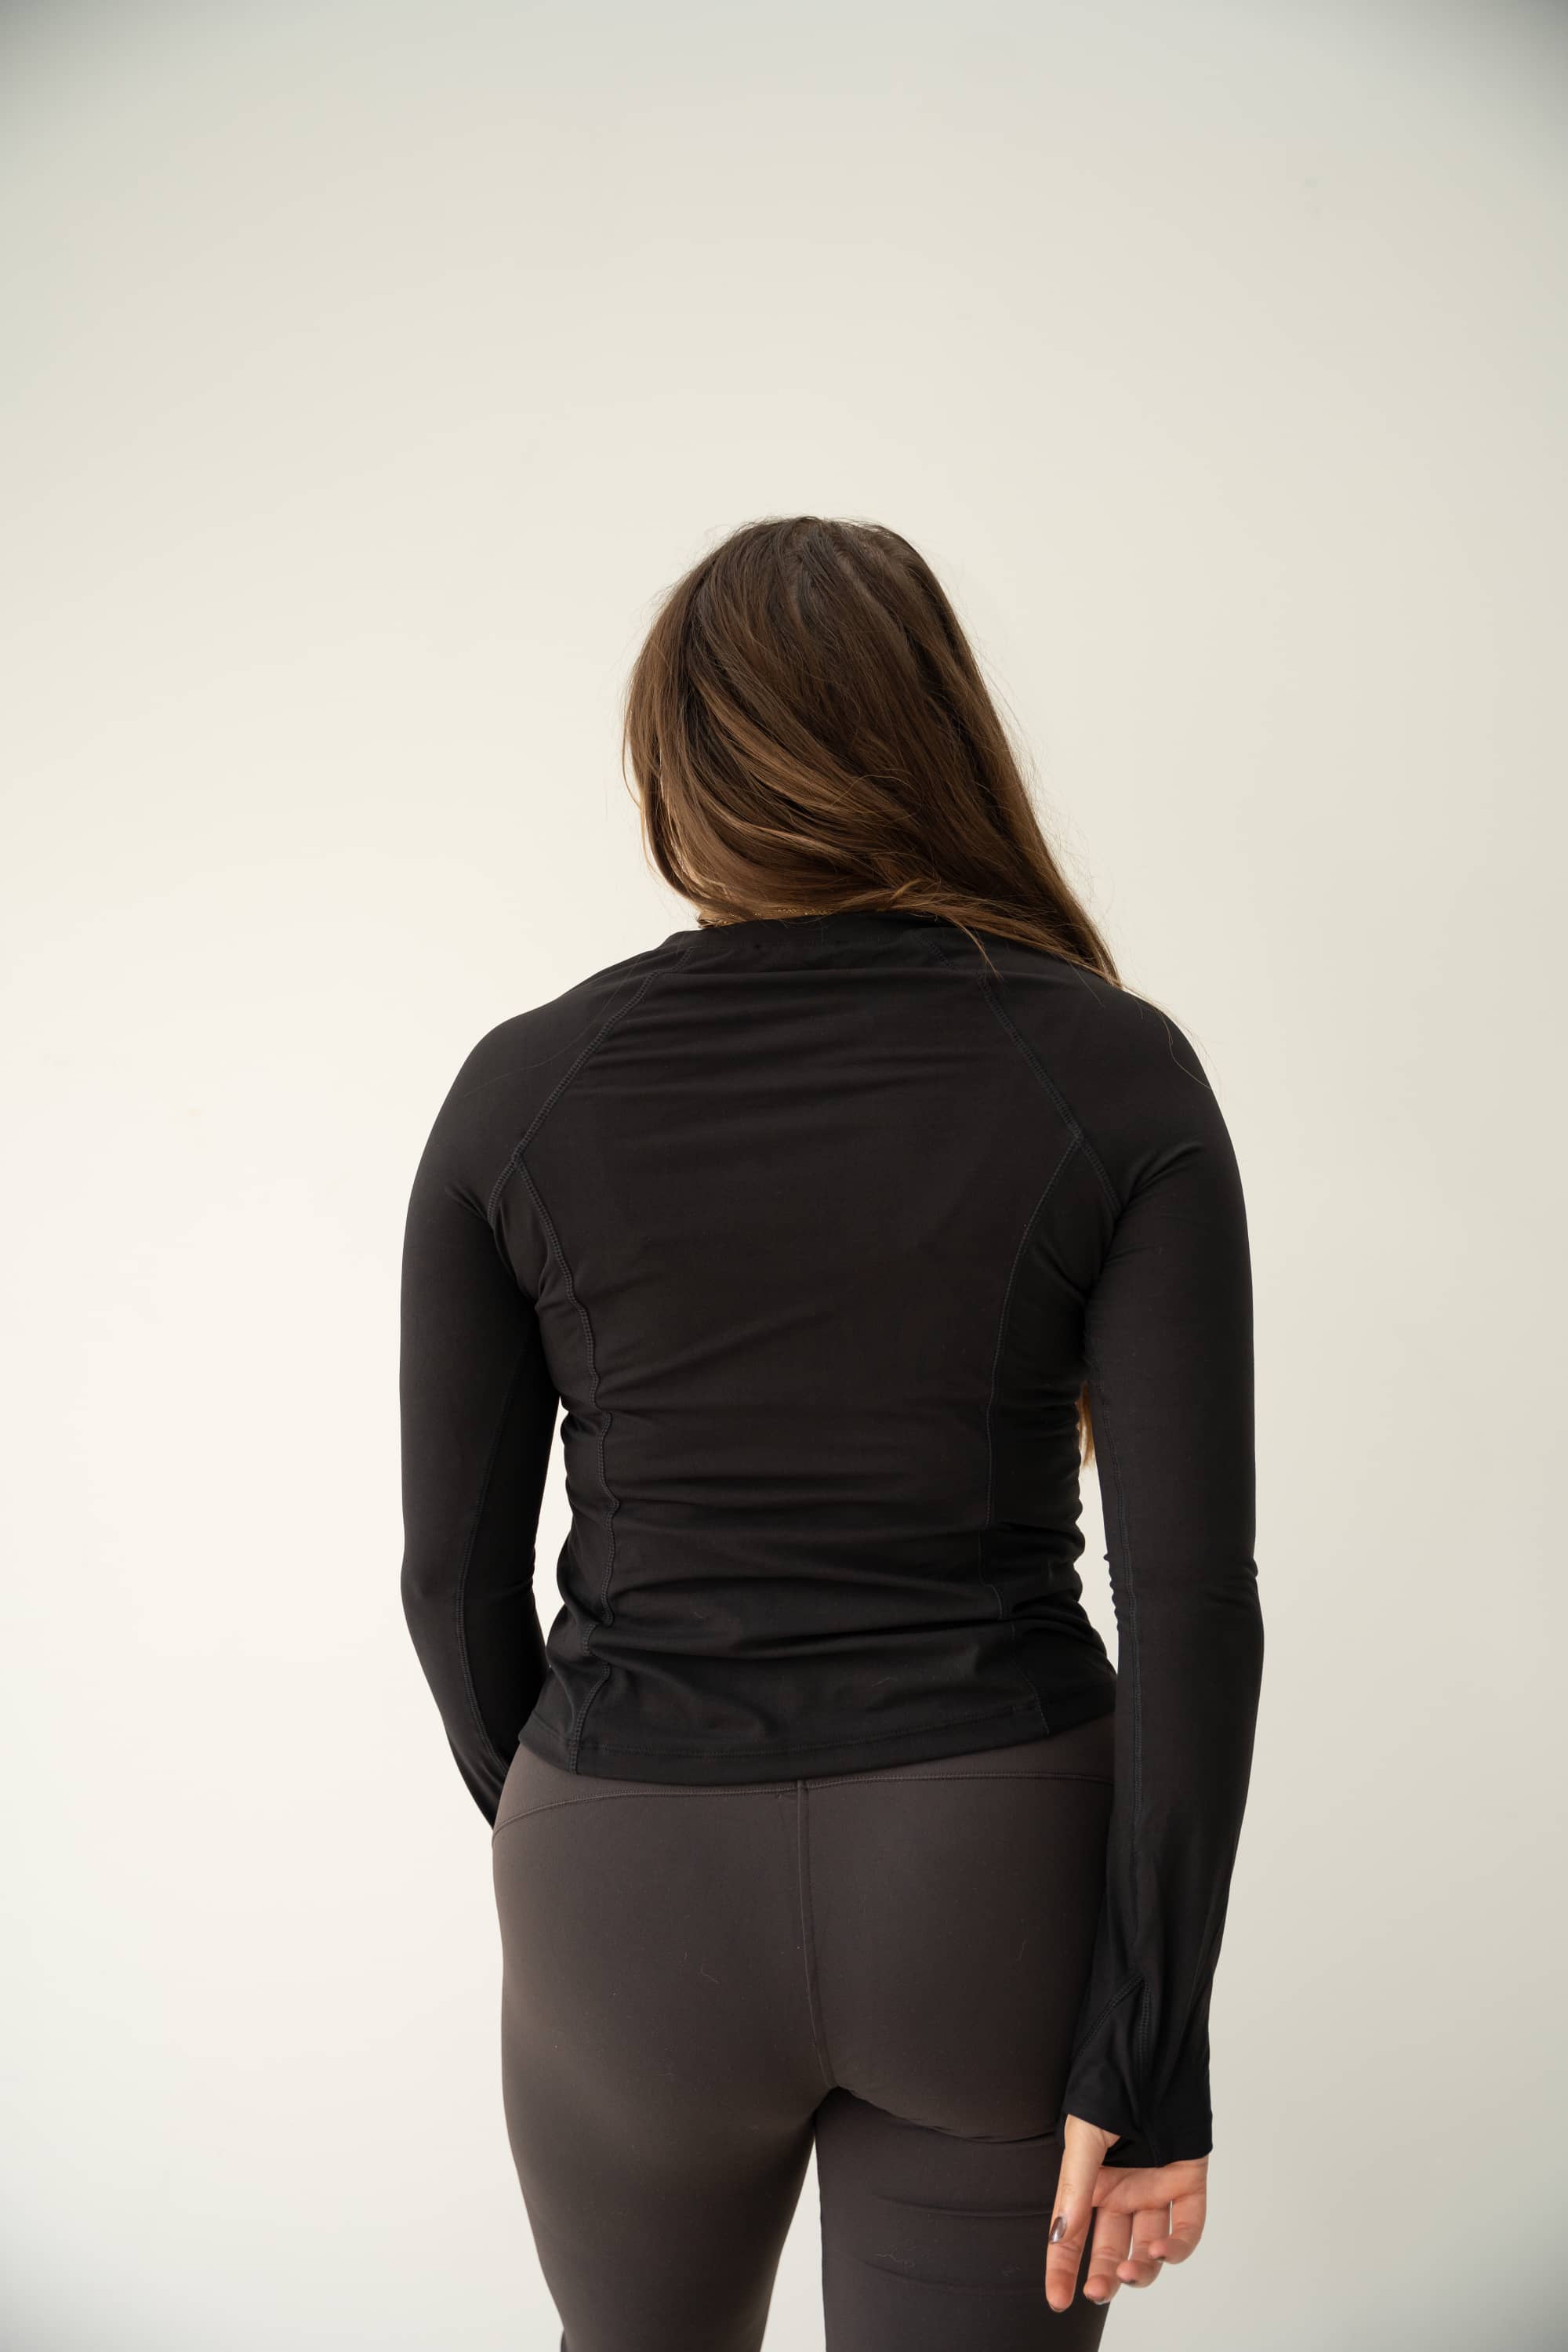 Long-sleeved performance shirt in Black with thumbholes.